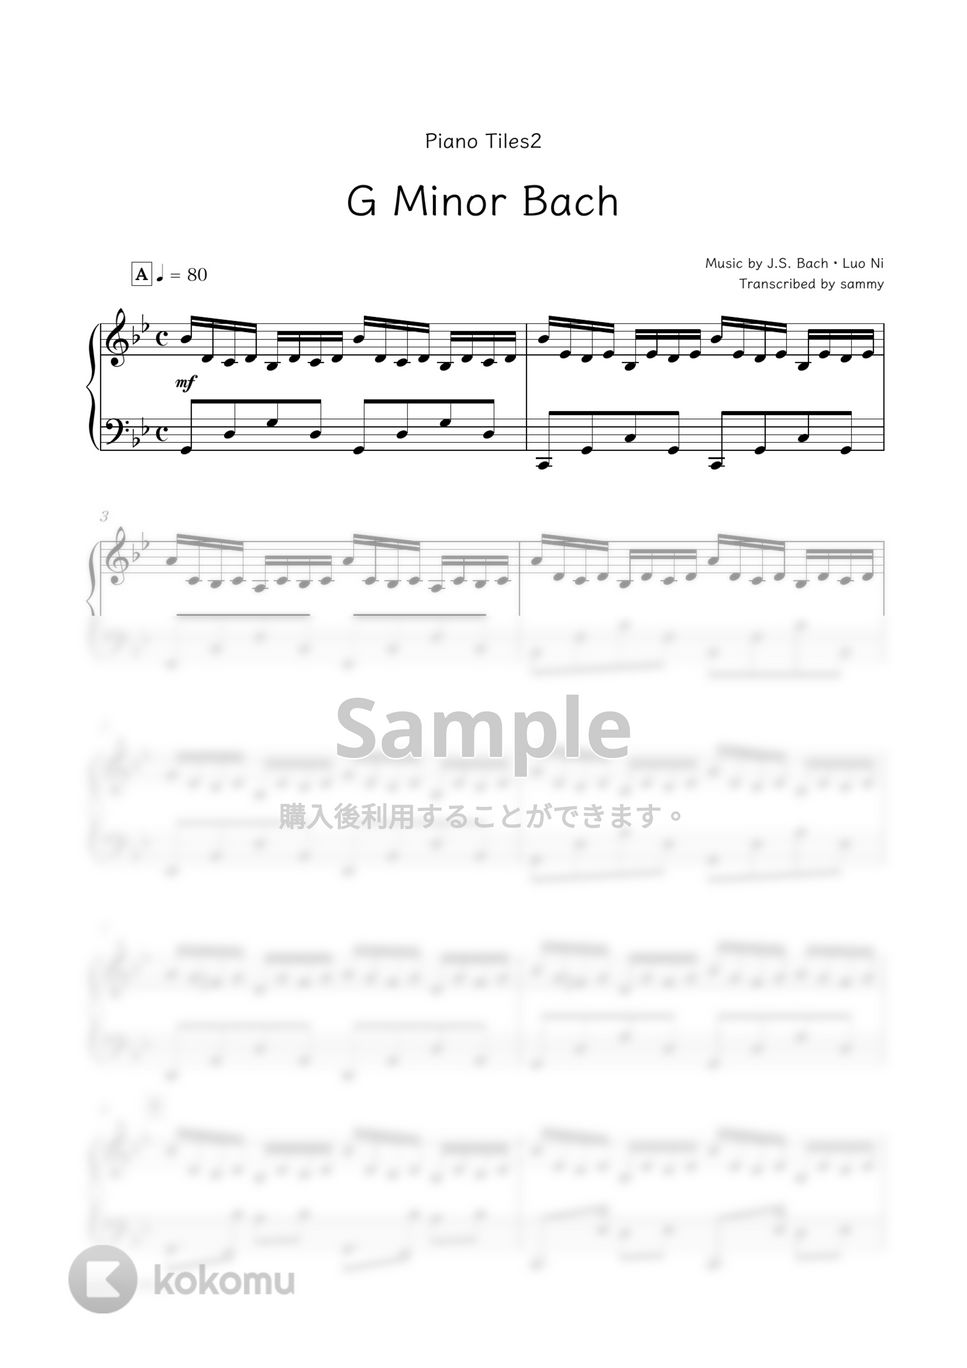 Piano Tiles2 - G Minor Bach (Luo Ni) by sammy